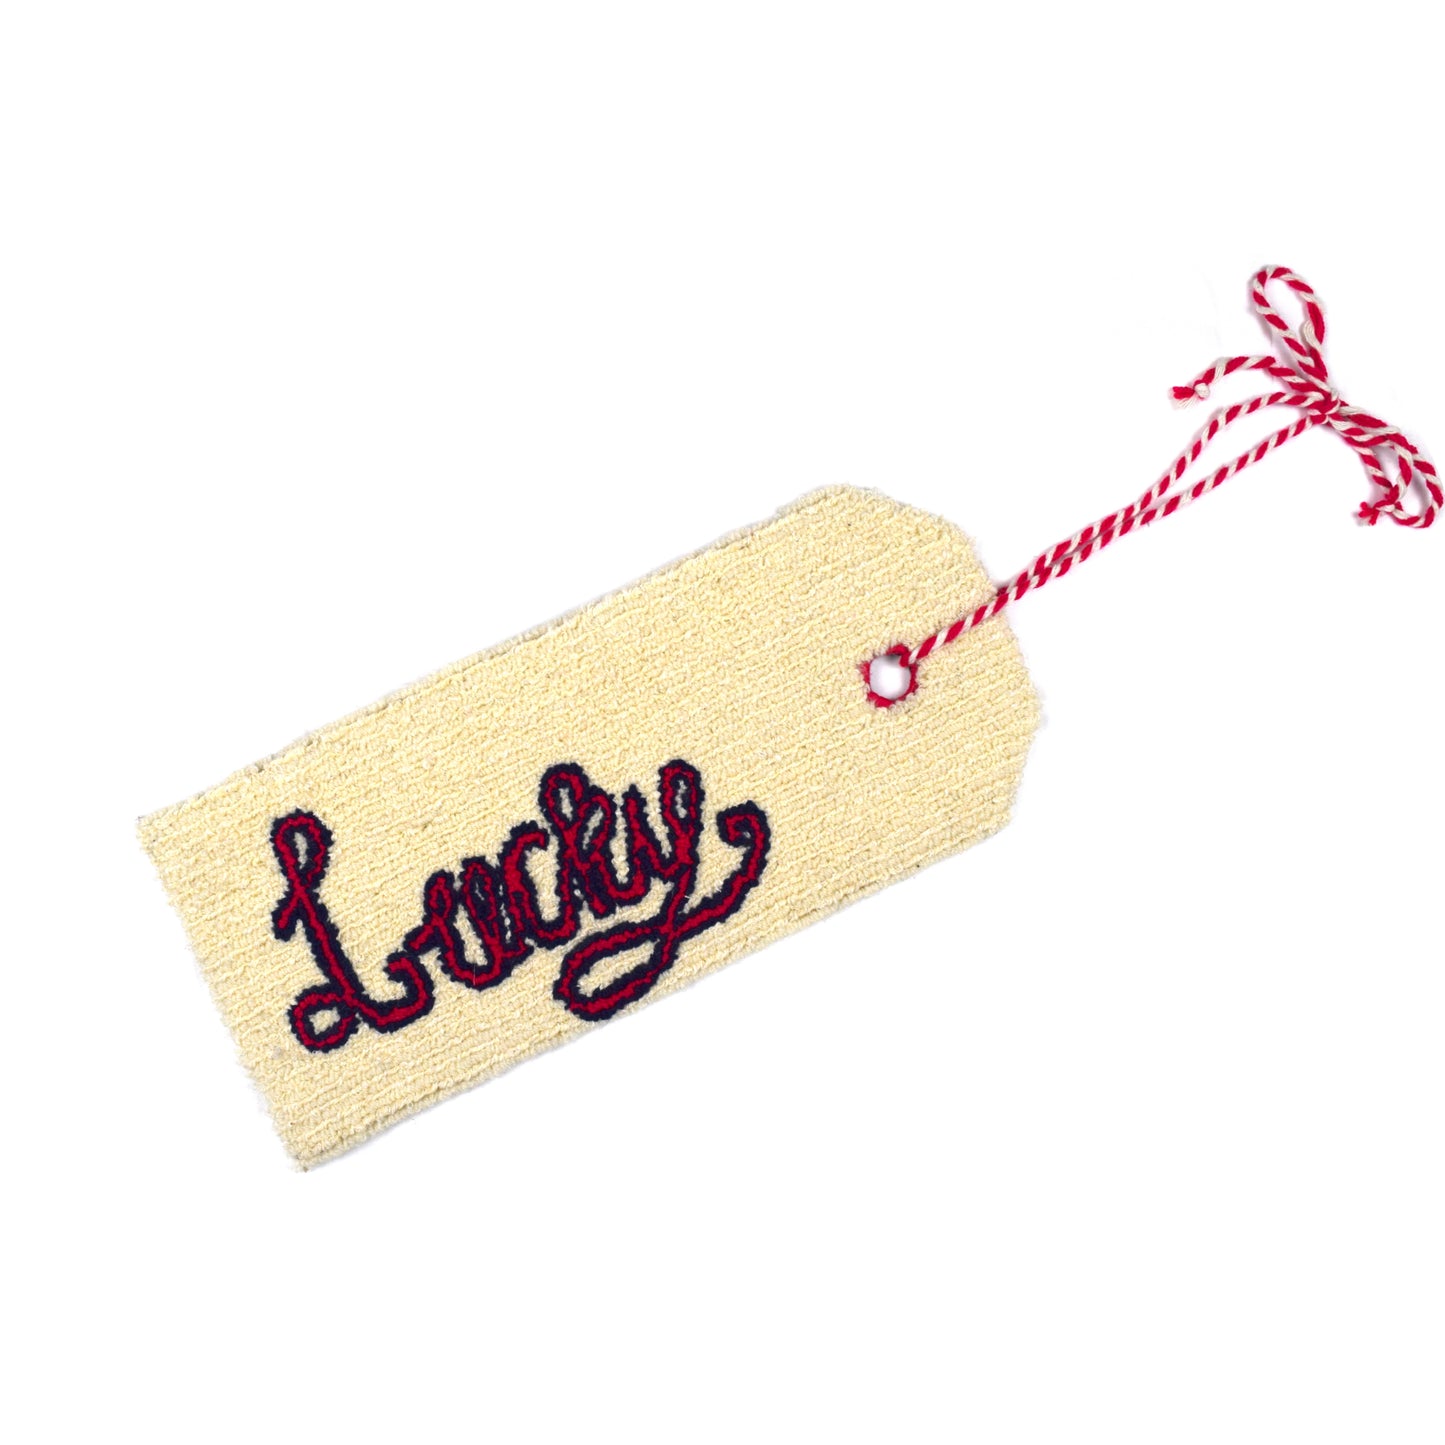 LUCKY - LABEL - Hand Punched Wall Art